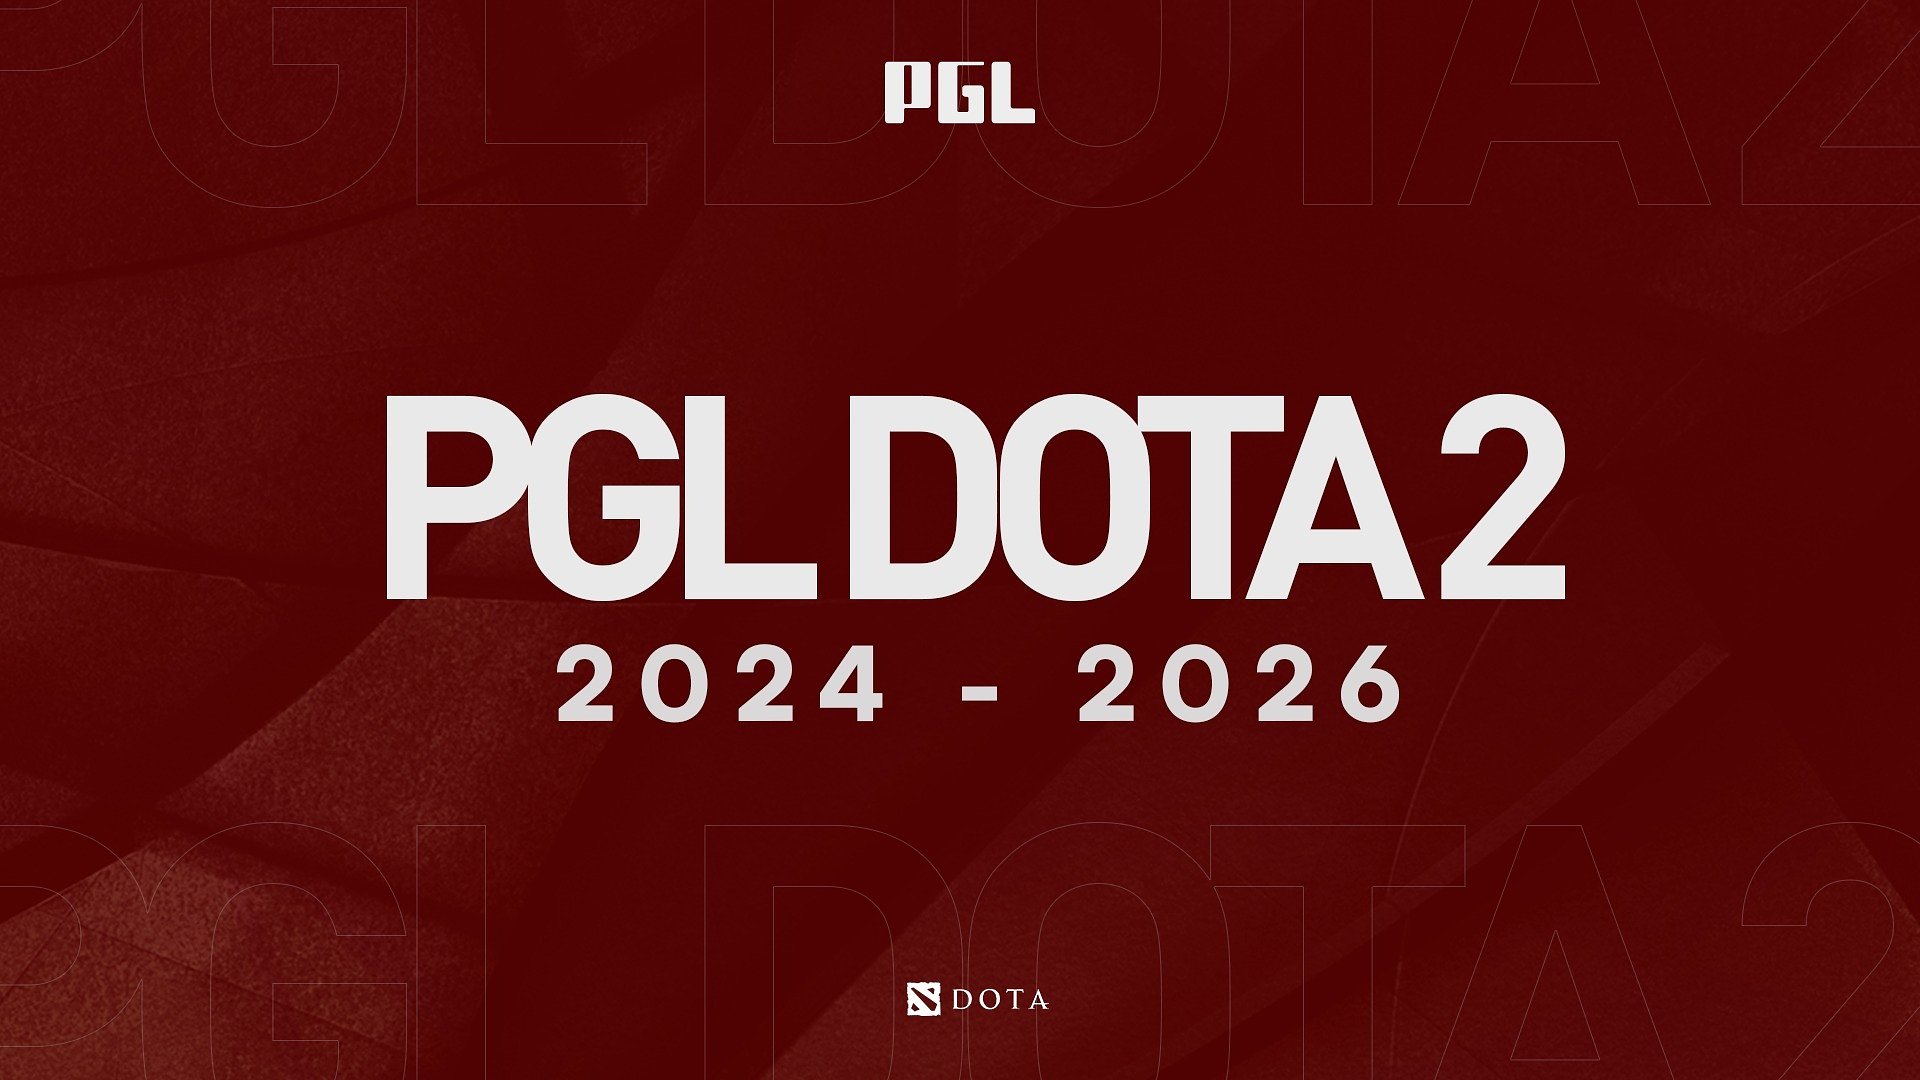 Dota 2: PGL to Run Eight $1M Tournaments from 2024 to 2026